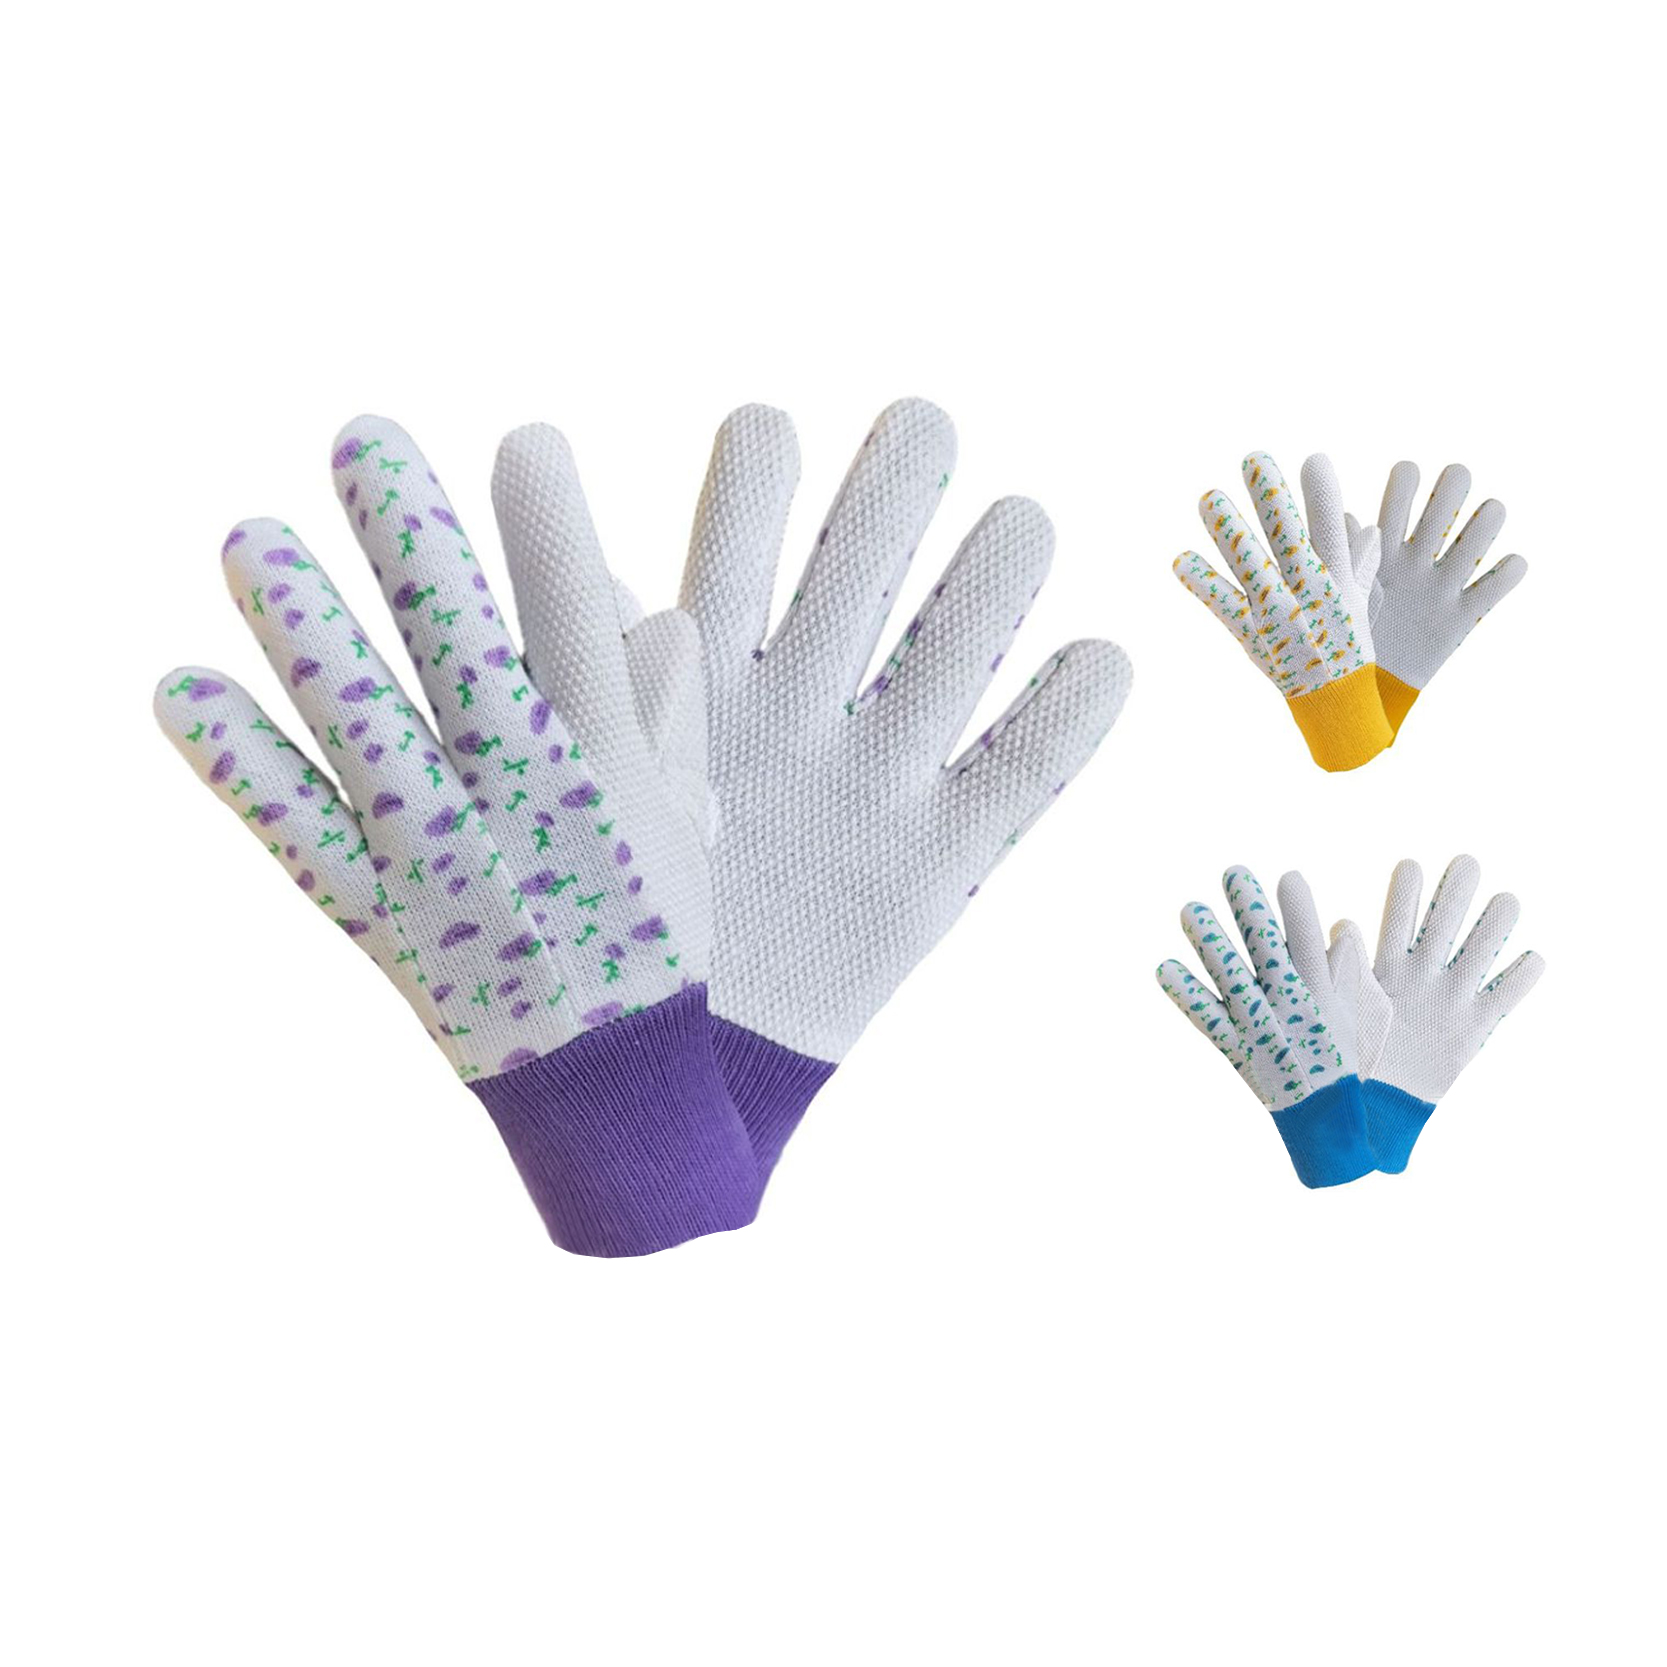 Garden Working Gloves With Pvc Dots On Palm Women Gloves Anti-slip Abrasion Resistant and Breathable Canvas Dotted Gloves